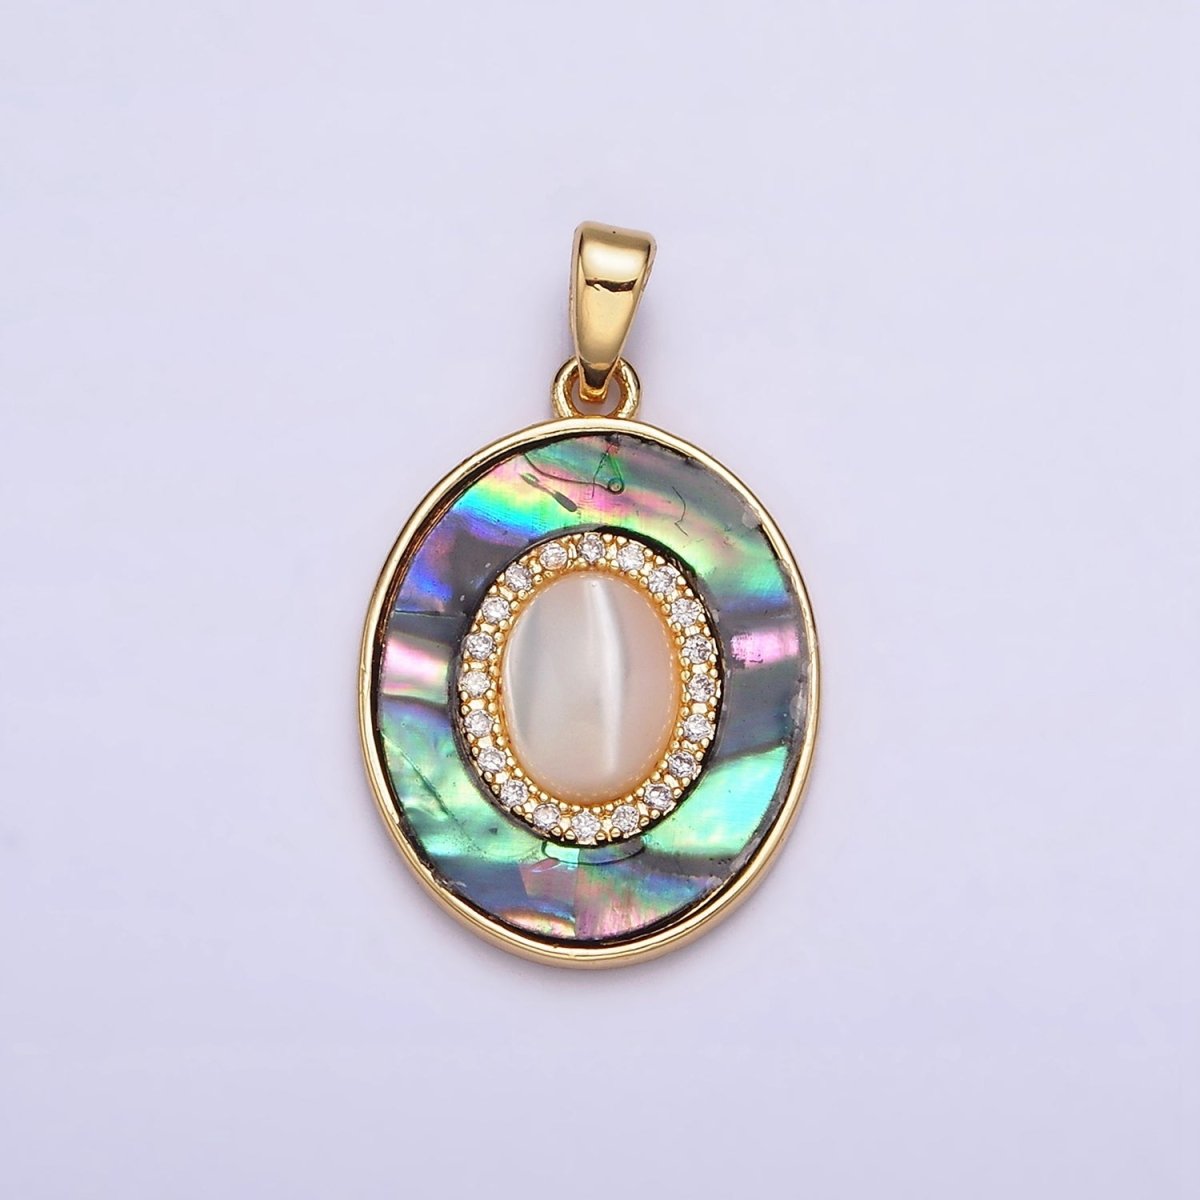 24K Gold Filled Turquoise, Pearl, Abalone Micro Paved CZ Shell Pearl, Abalone Pendant | AA595 - AA597 - DLUXCA